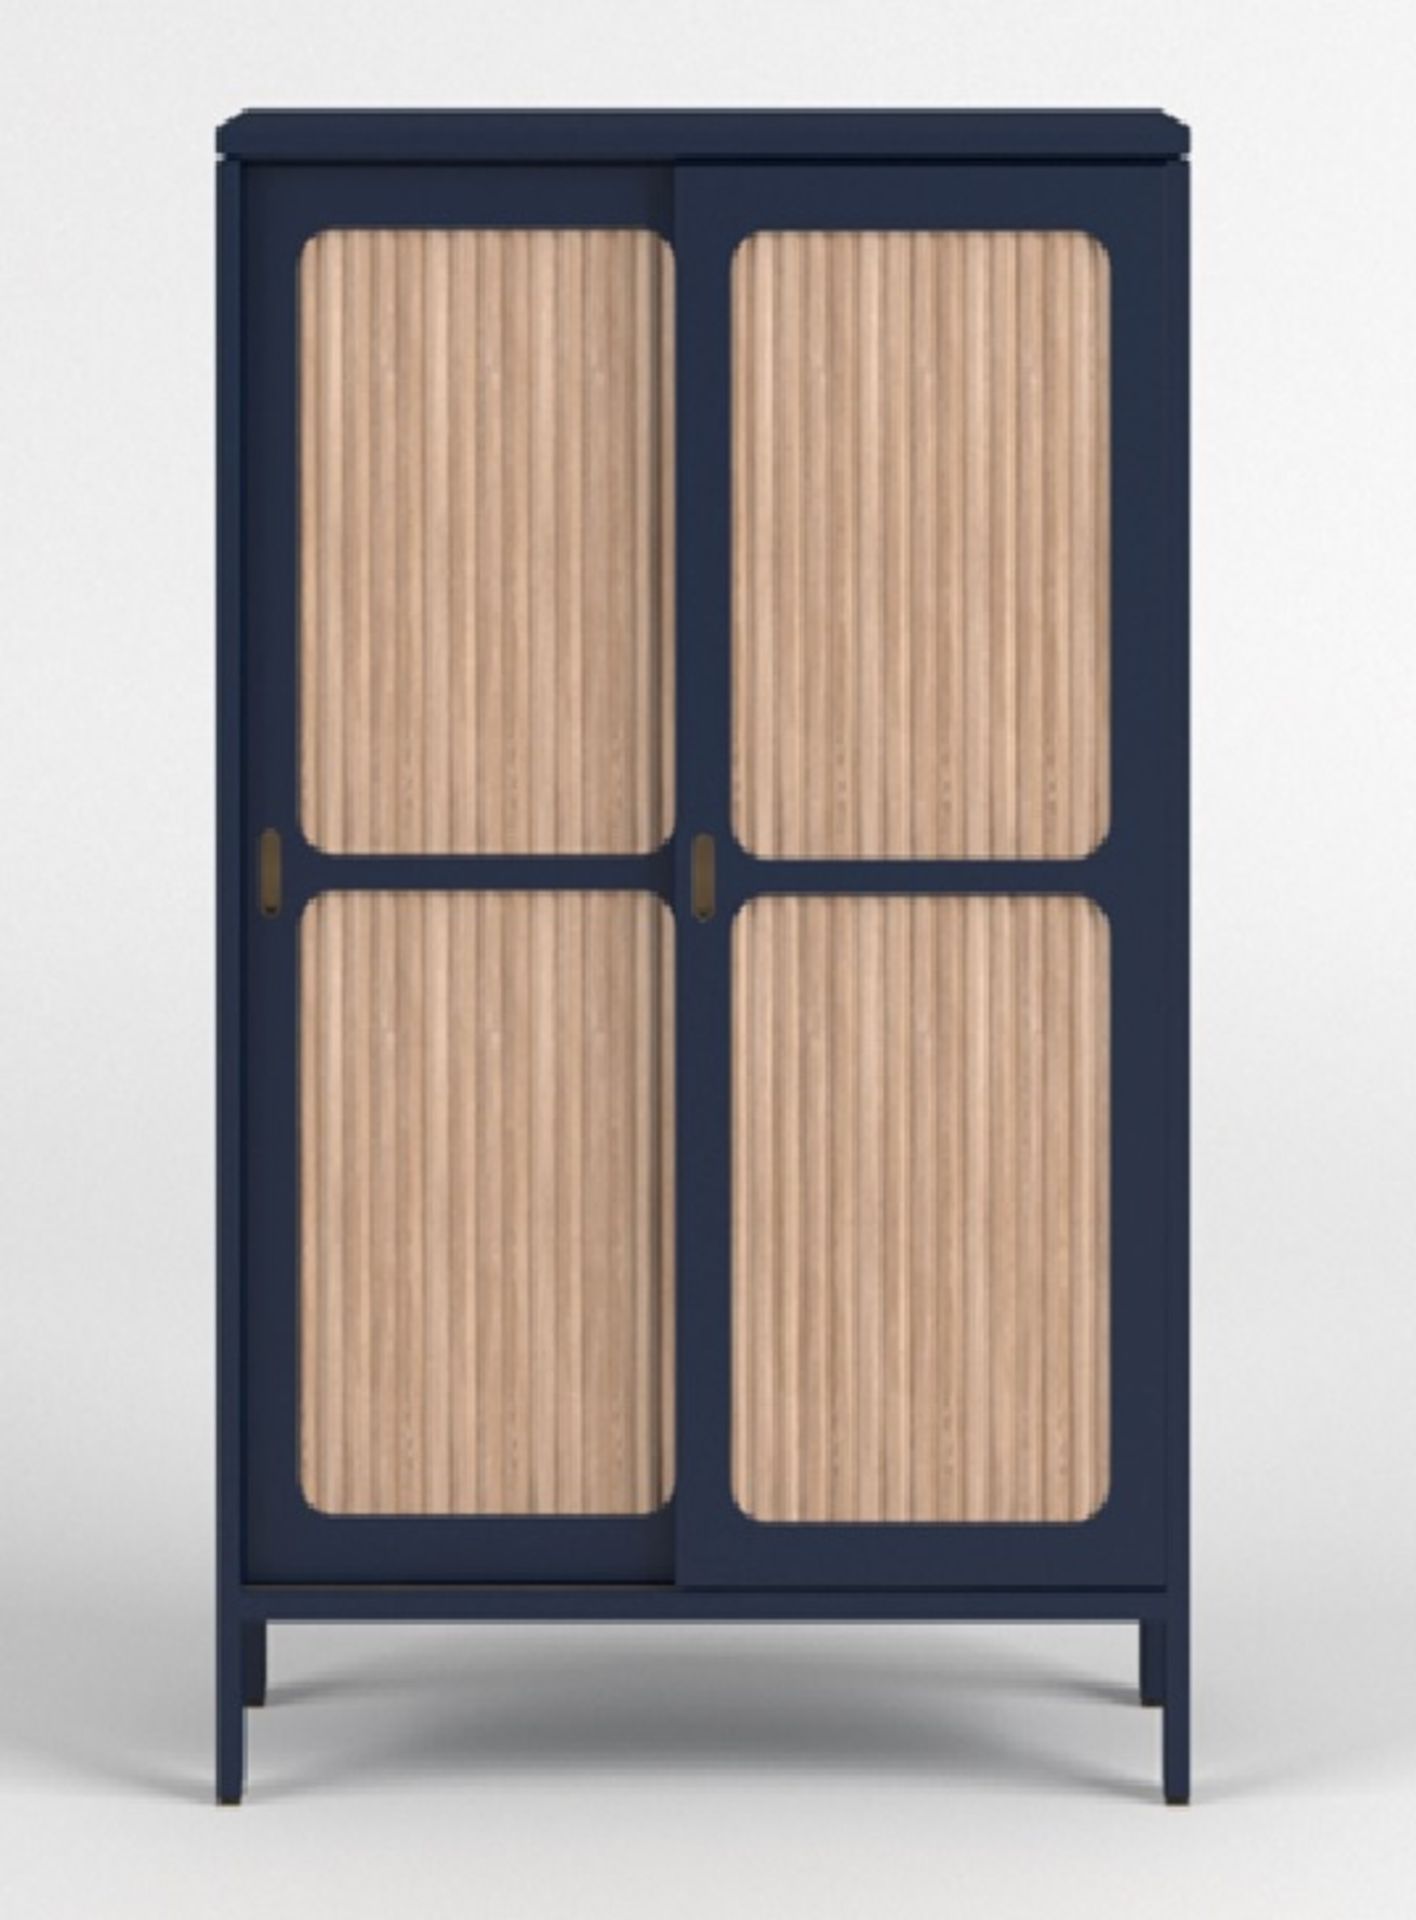 Reed Cabinet The Reed Cabinet offers a large amount of storage space with its black doors and